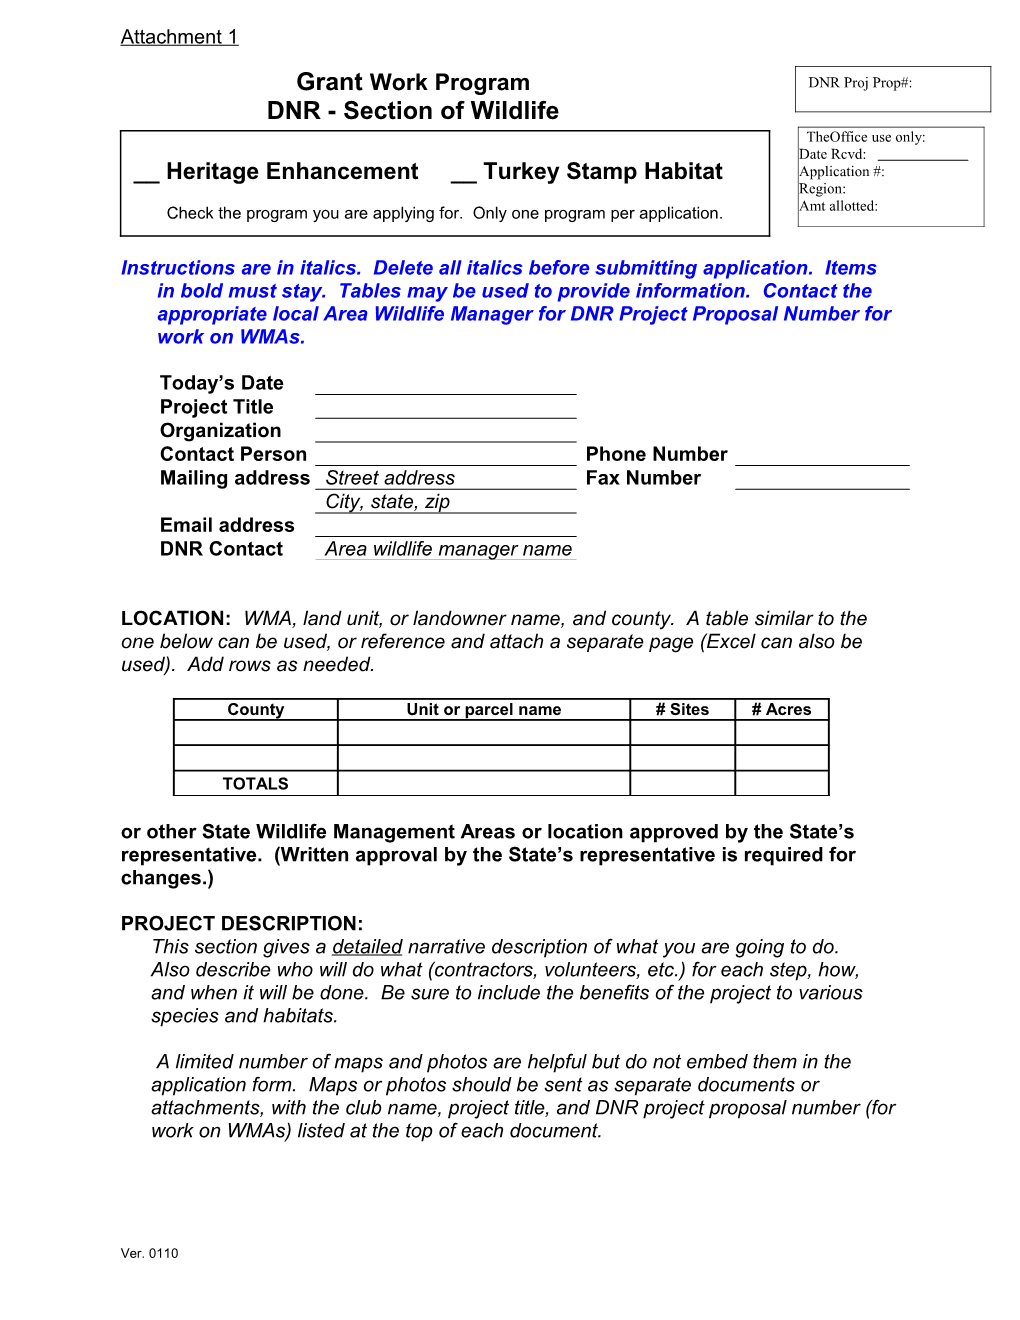 HE and Turkey Stamp Grant Application